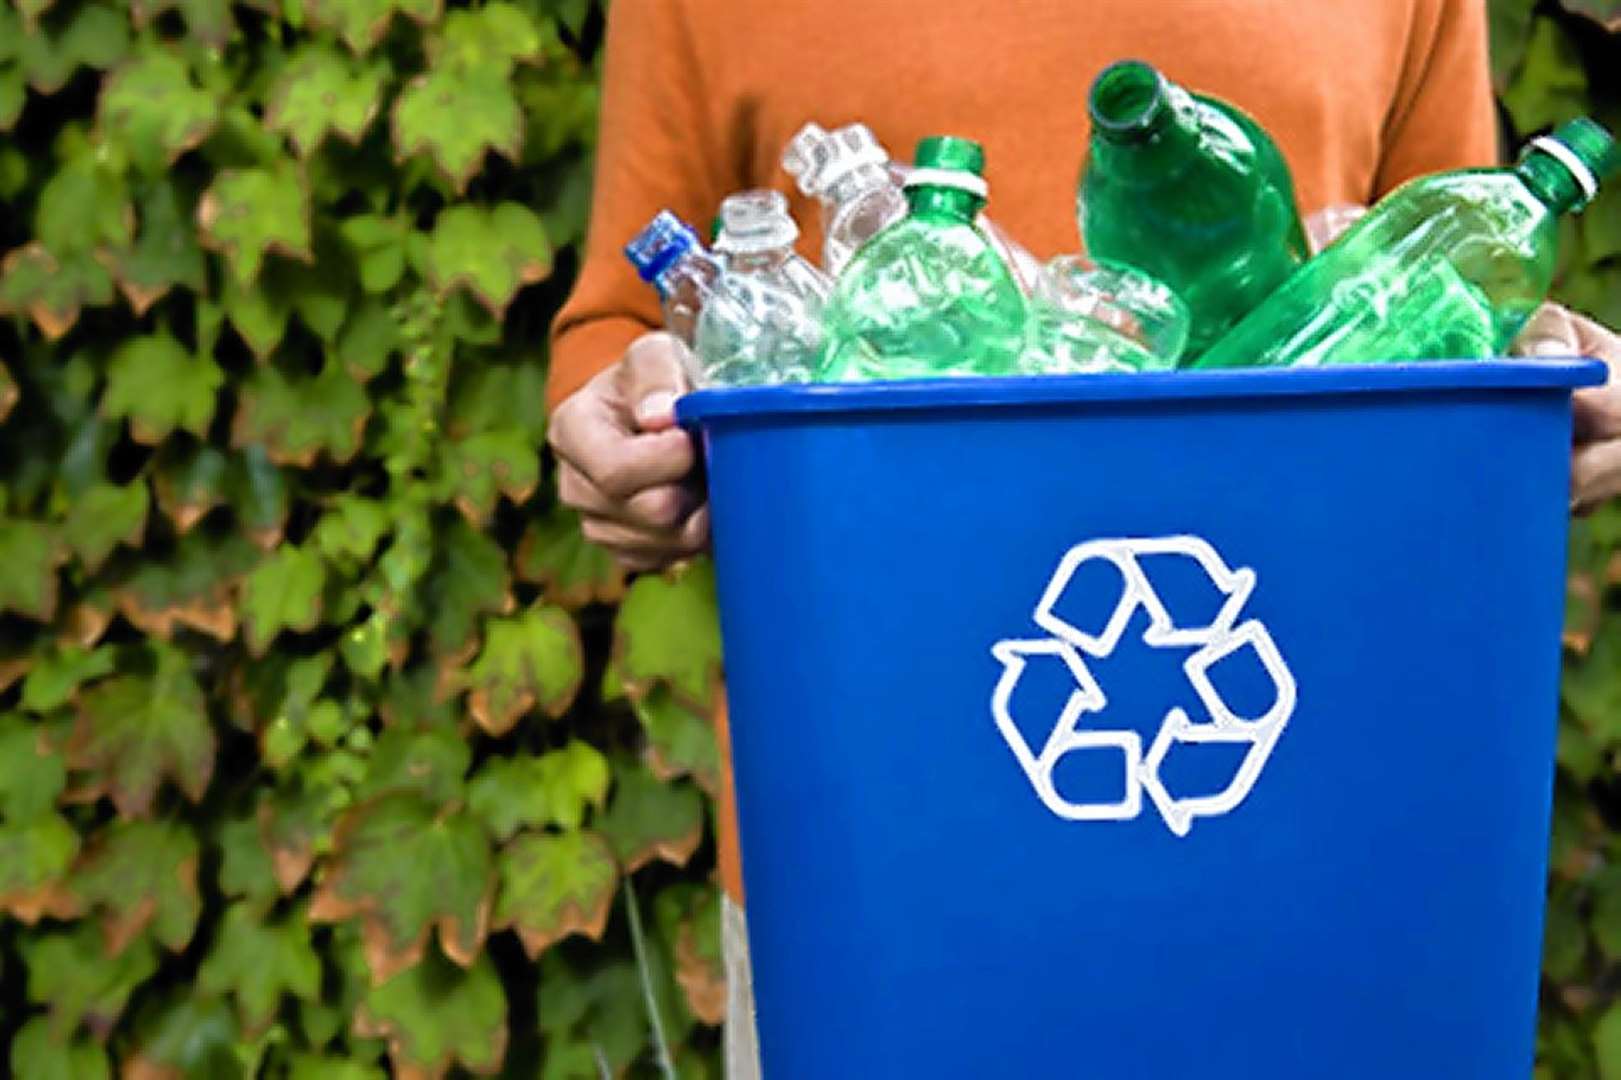 The Scottish Government has launched a consultation on recycling.